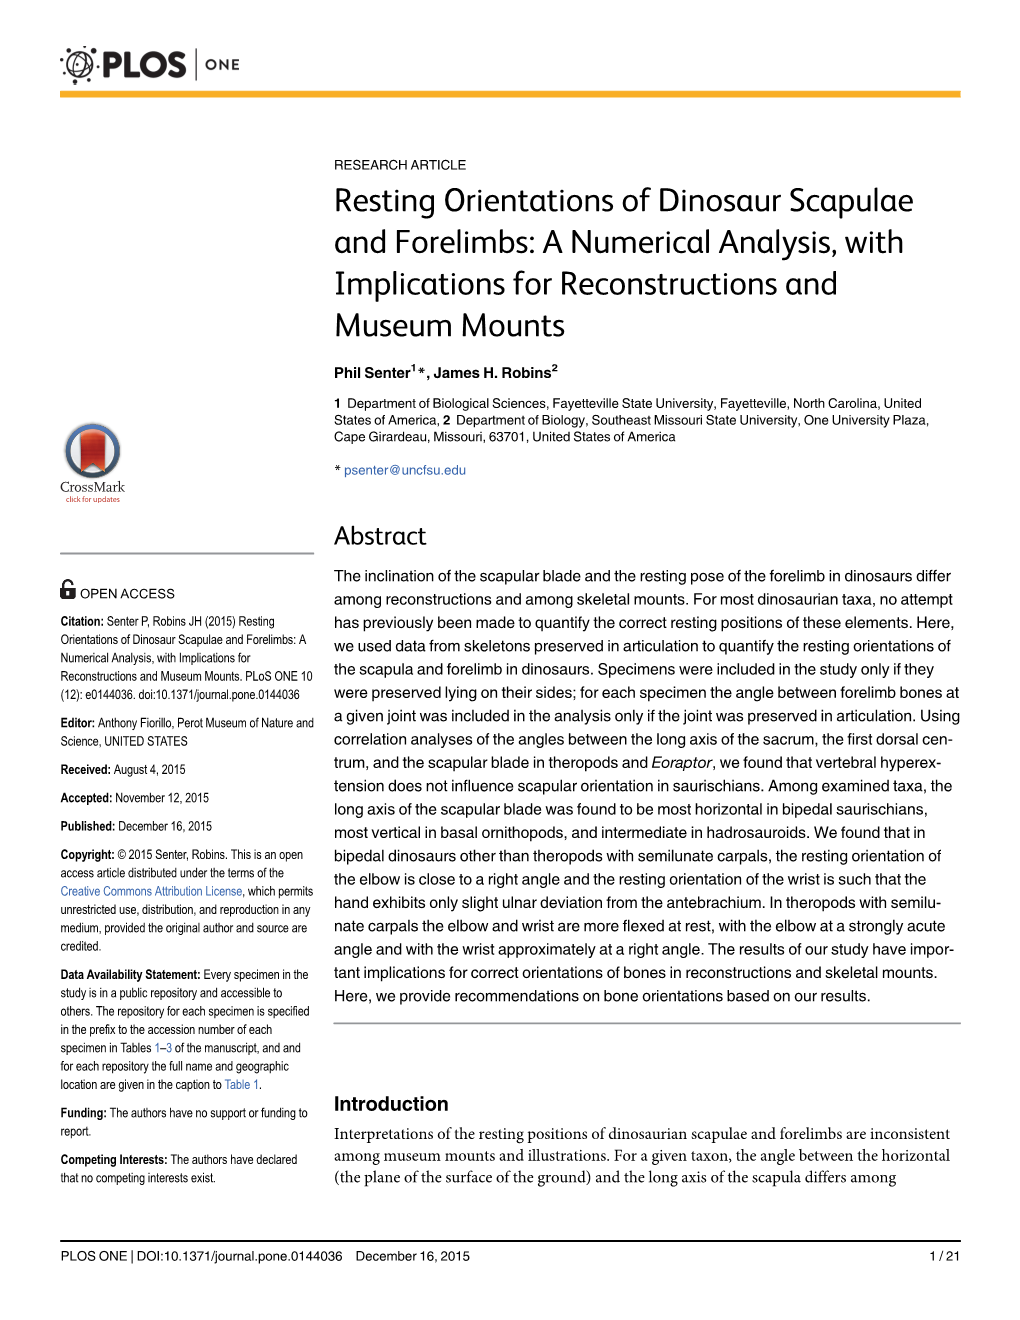 Resting Orientations of Dinosaur Scapulae and Forelimbs: a Numerical Analysis, with Implications for Reconstructions and Museum Mounts